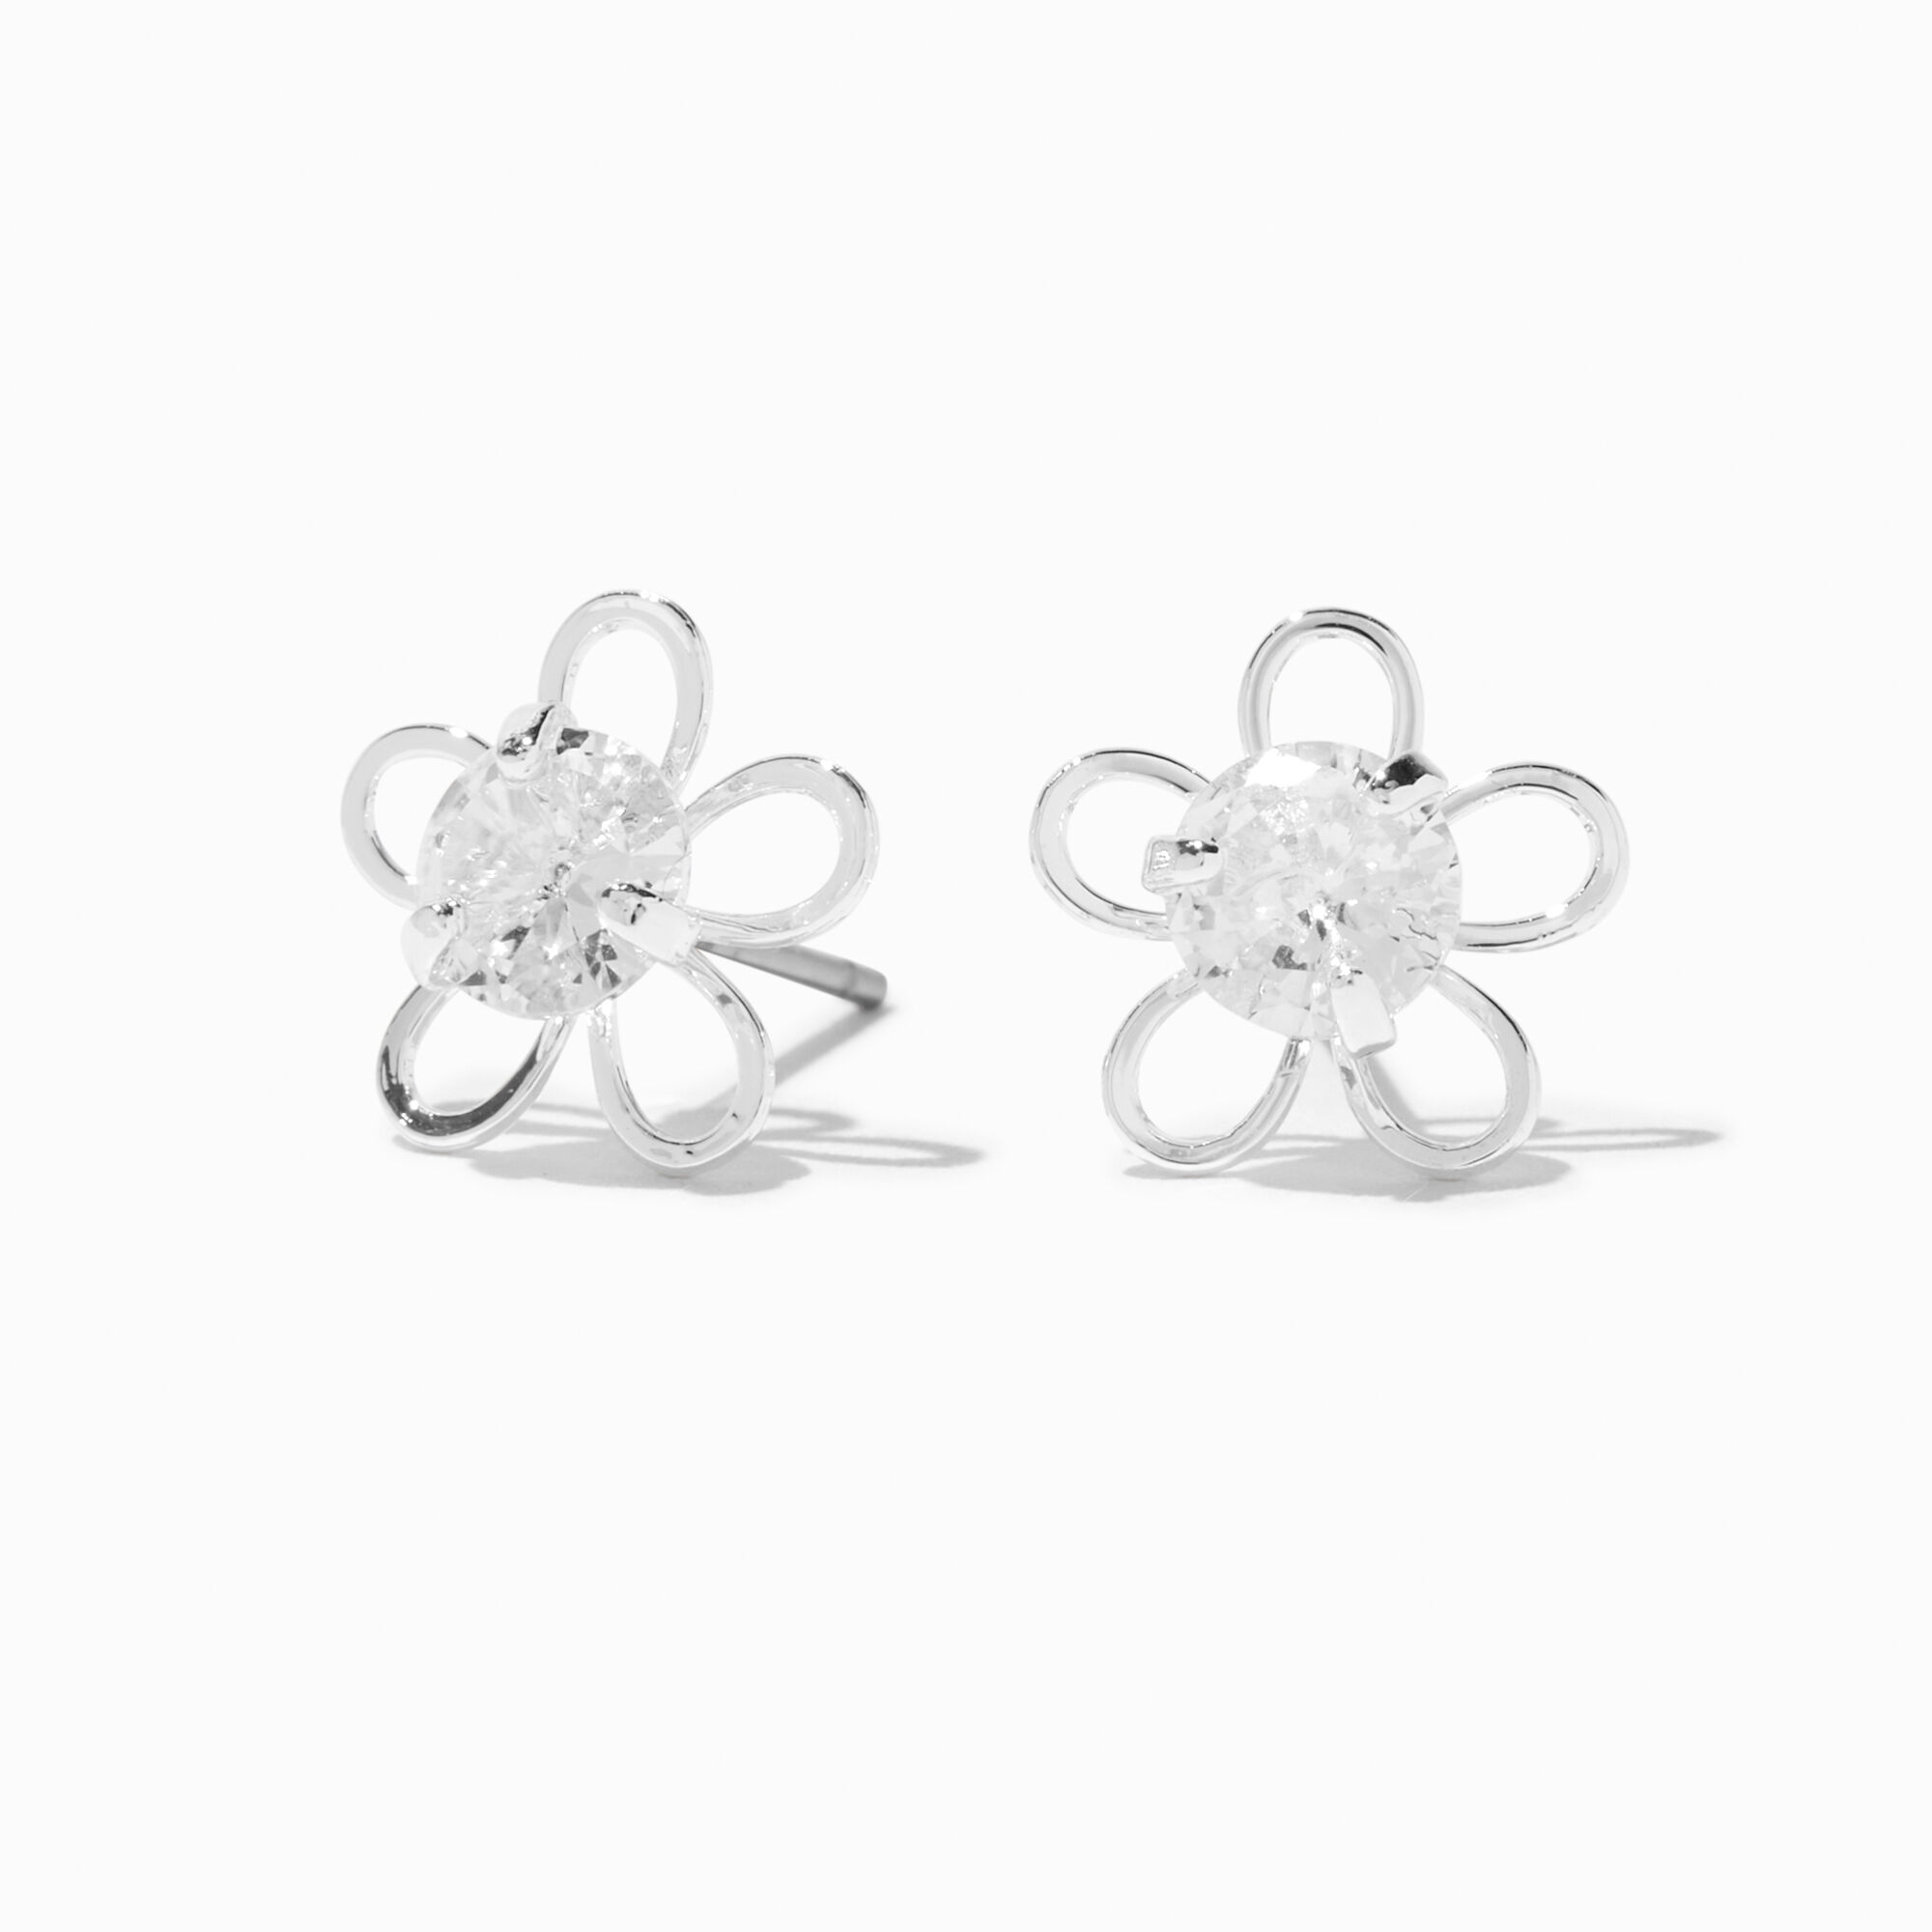 View Claires Tone Cubic Zirconia Daisy Stud Earrings Silver information